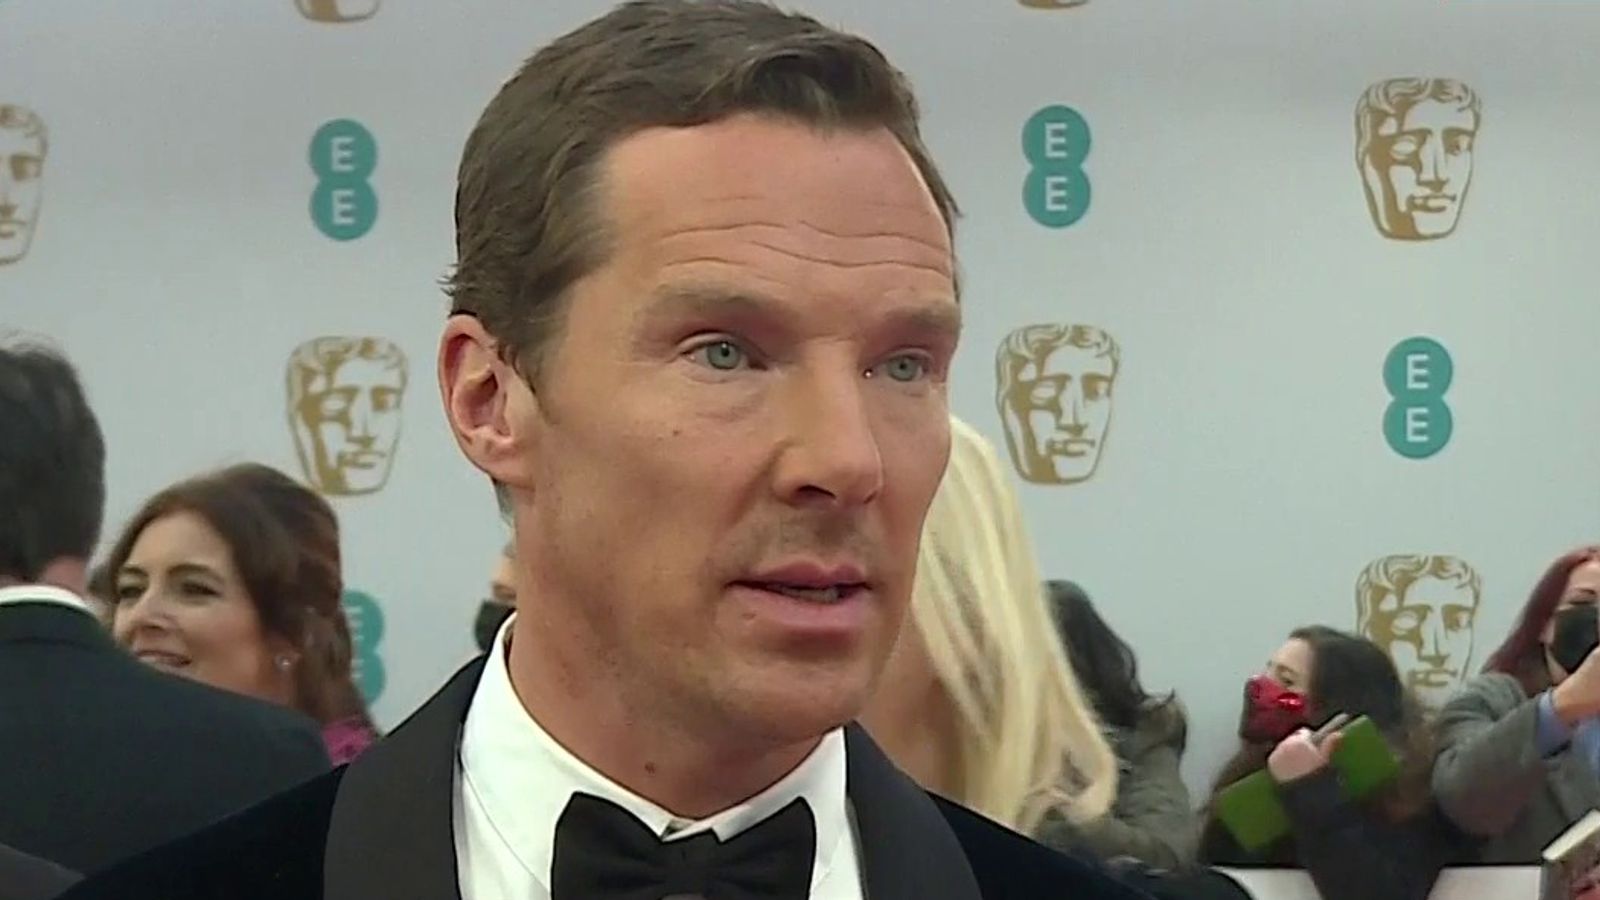 Benedict Cumberbatch: Barbados may hit star's family with reparation claim over historical links to slave trade